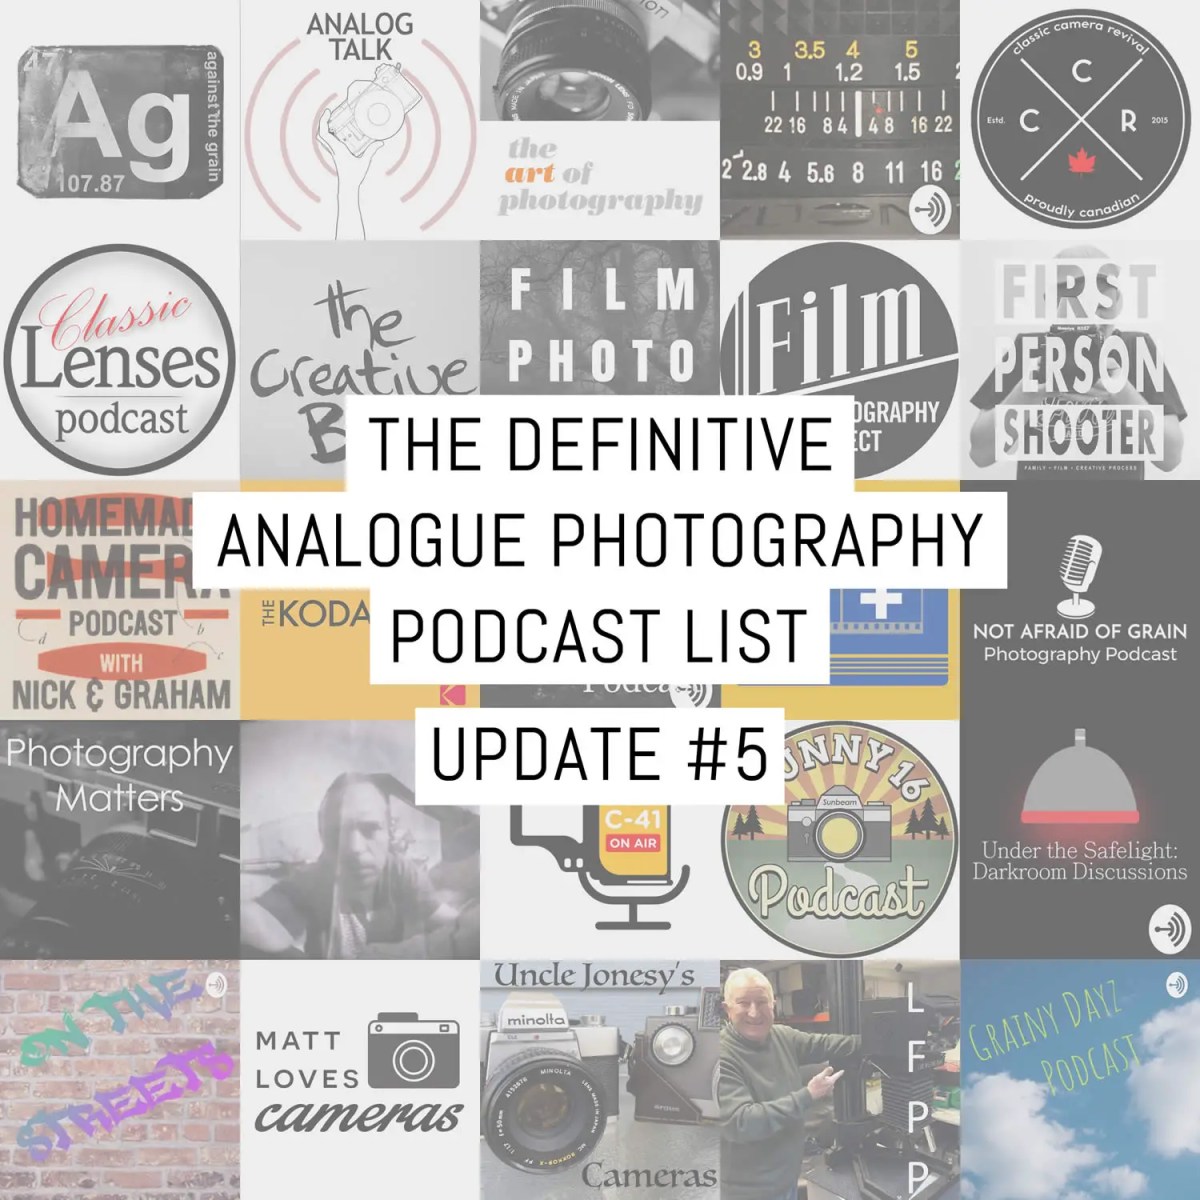 The definitive analogue photography podcast list: Update #5